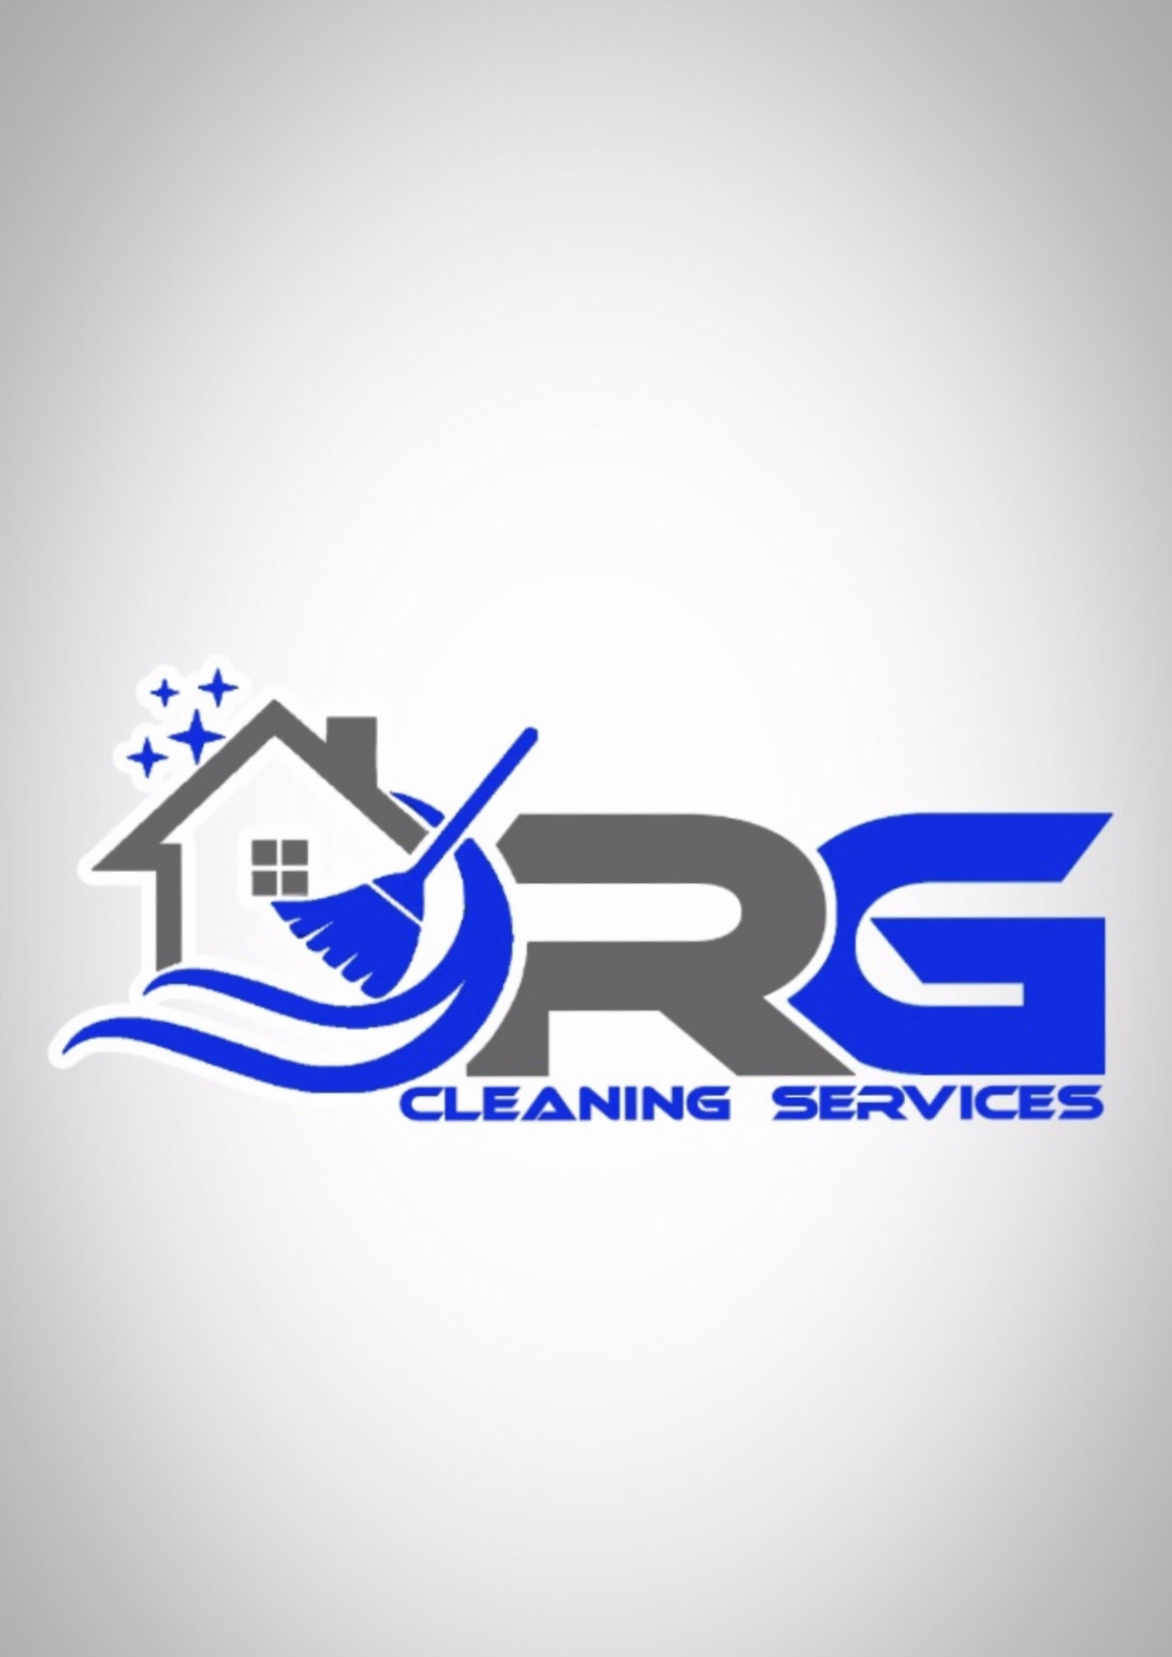 RG Cleaning Services Logo